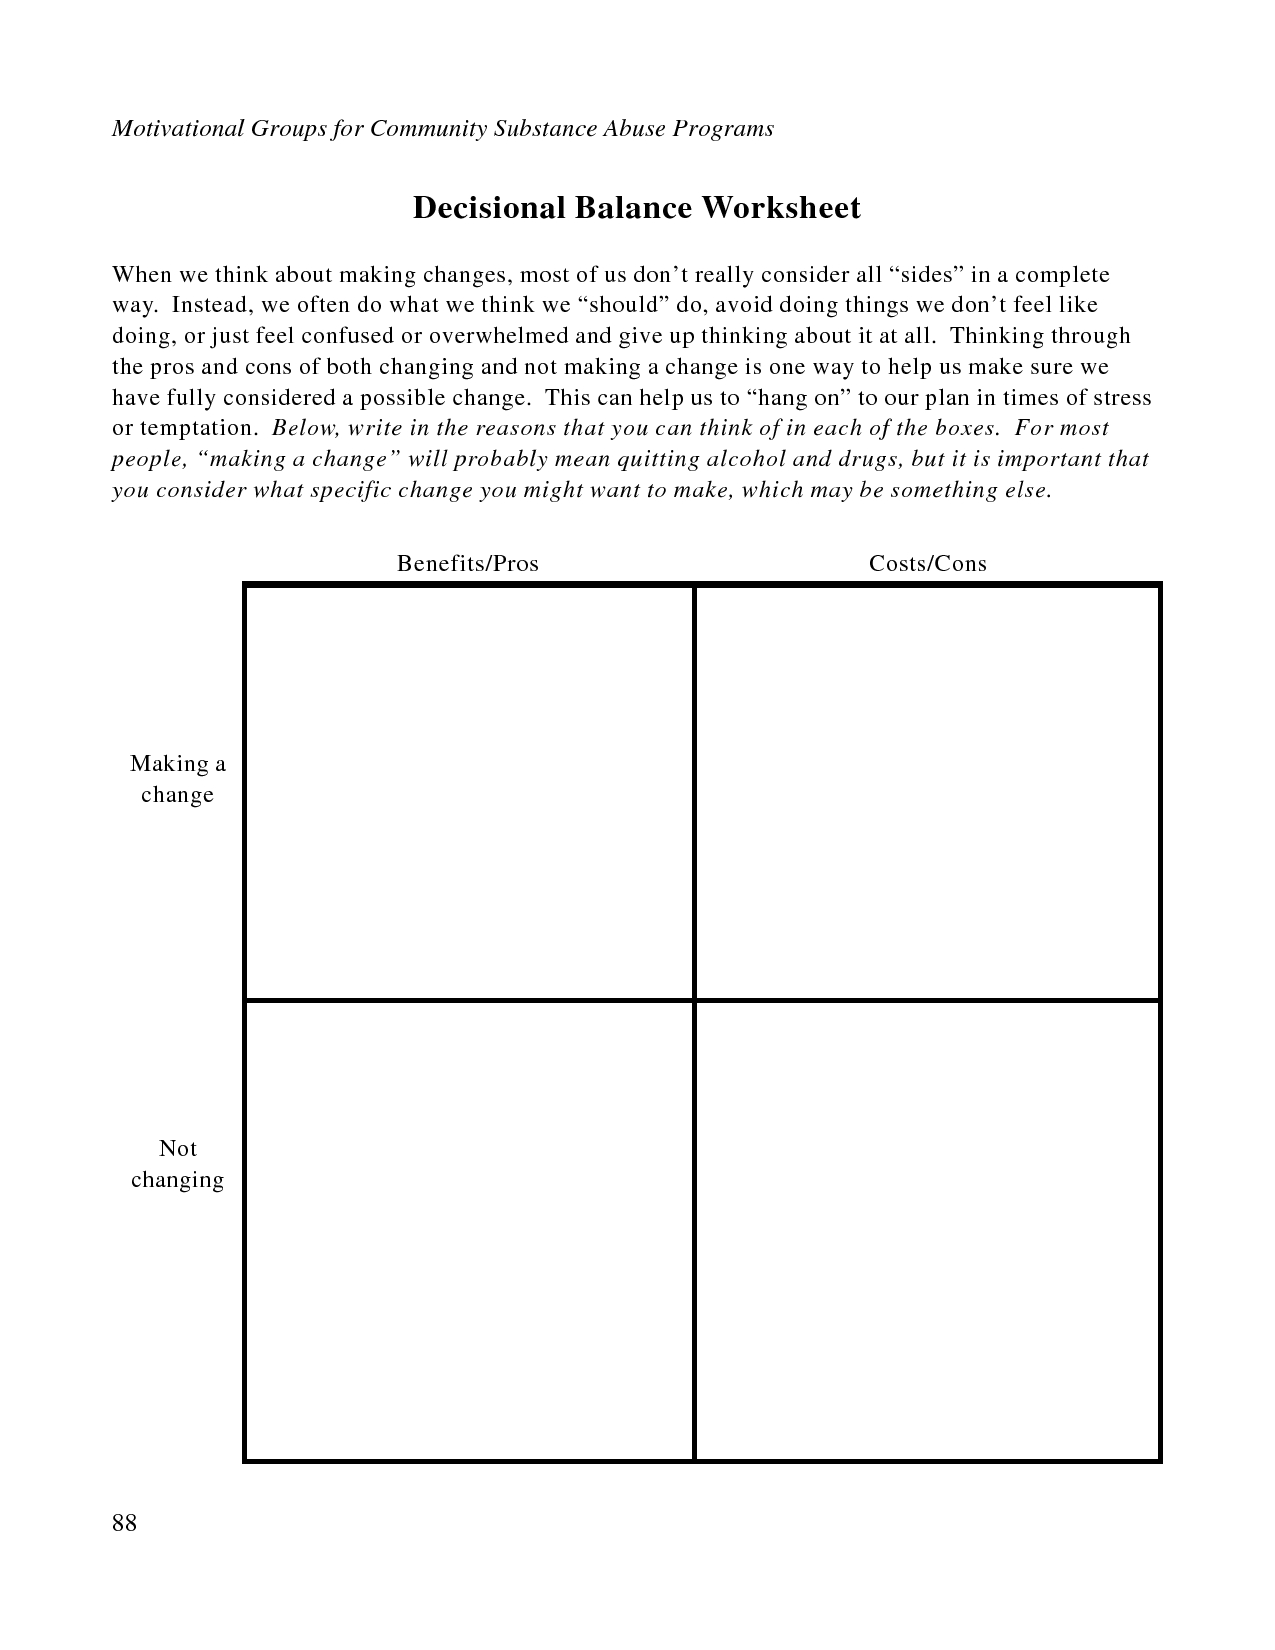 Dbt Pros And Cons Worksheet Pdf